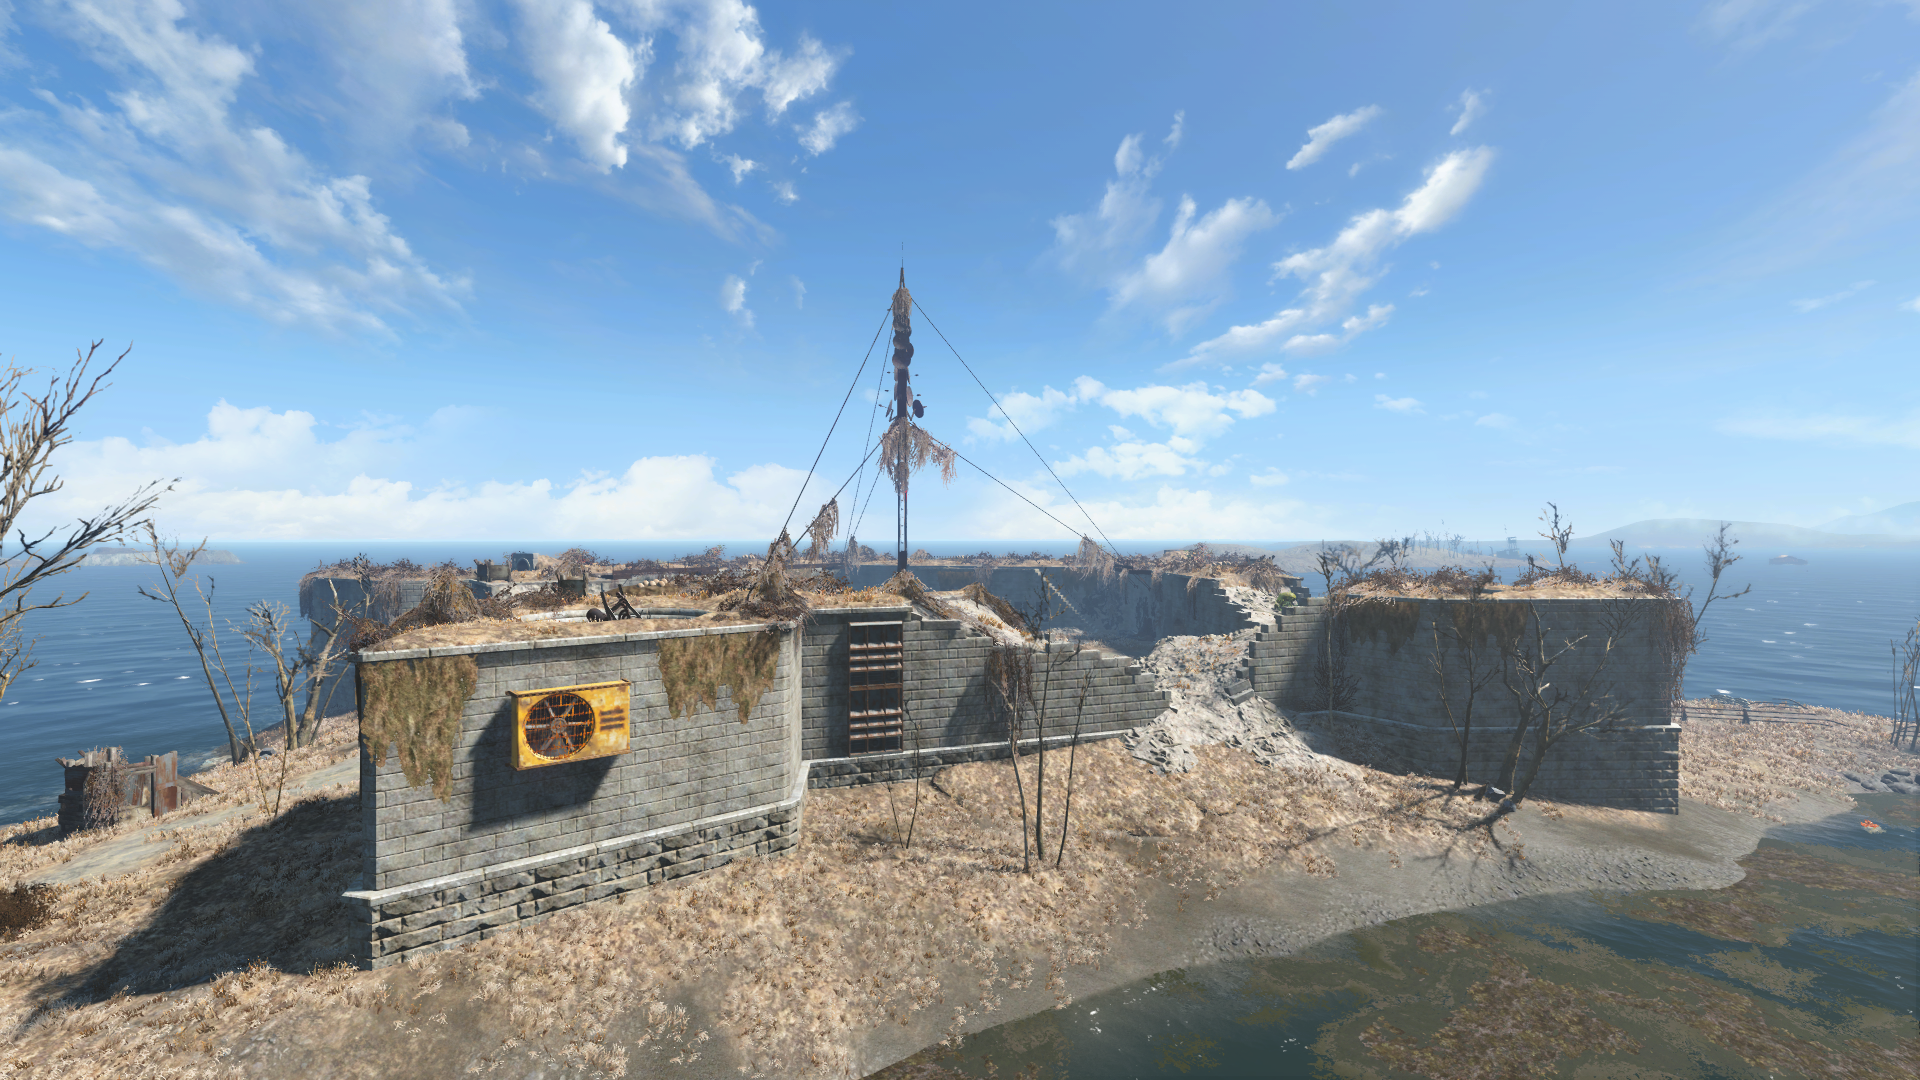 where is the castle in fallout 4